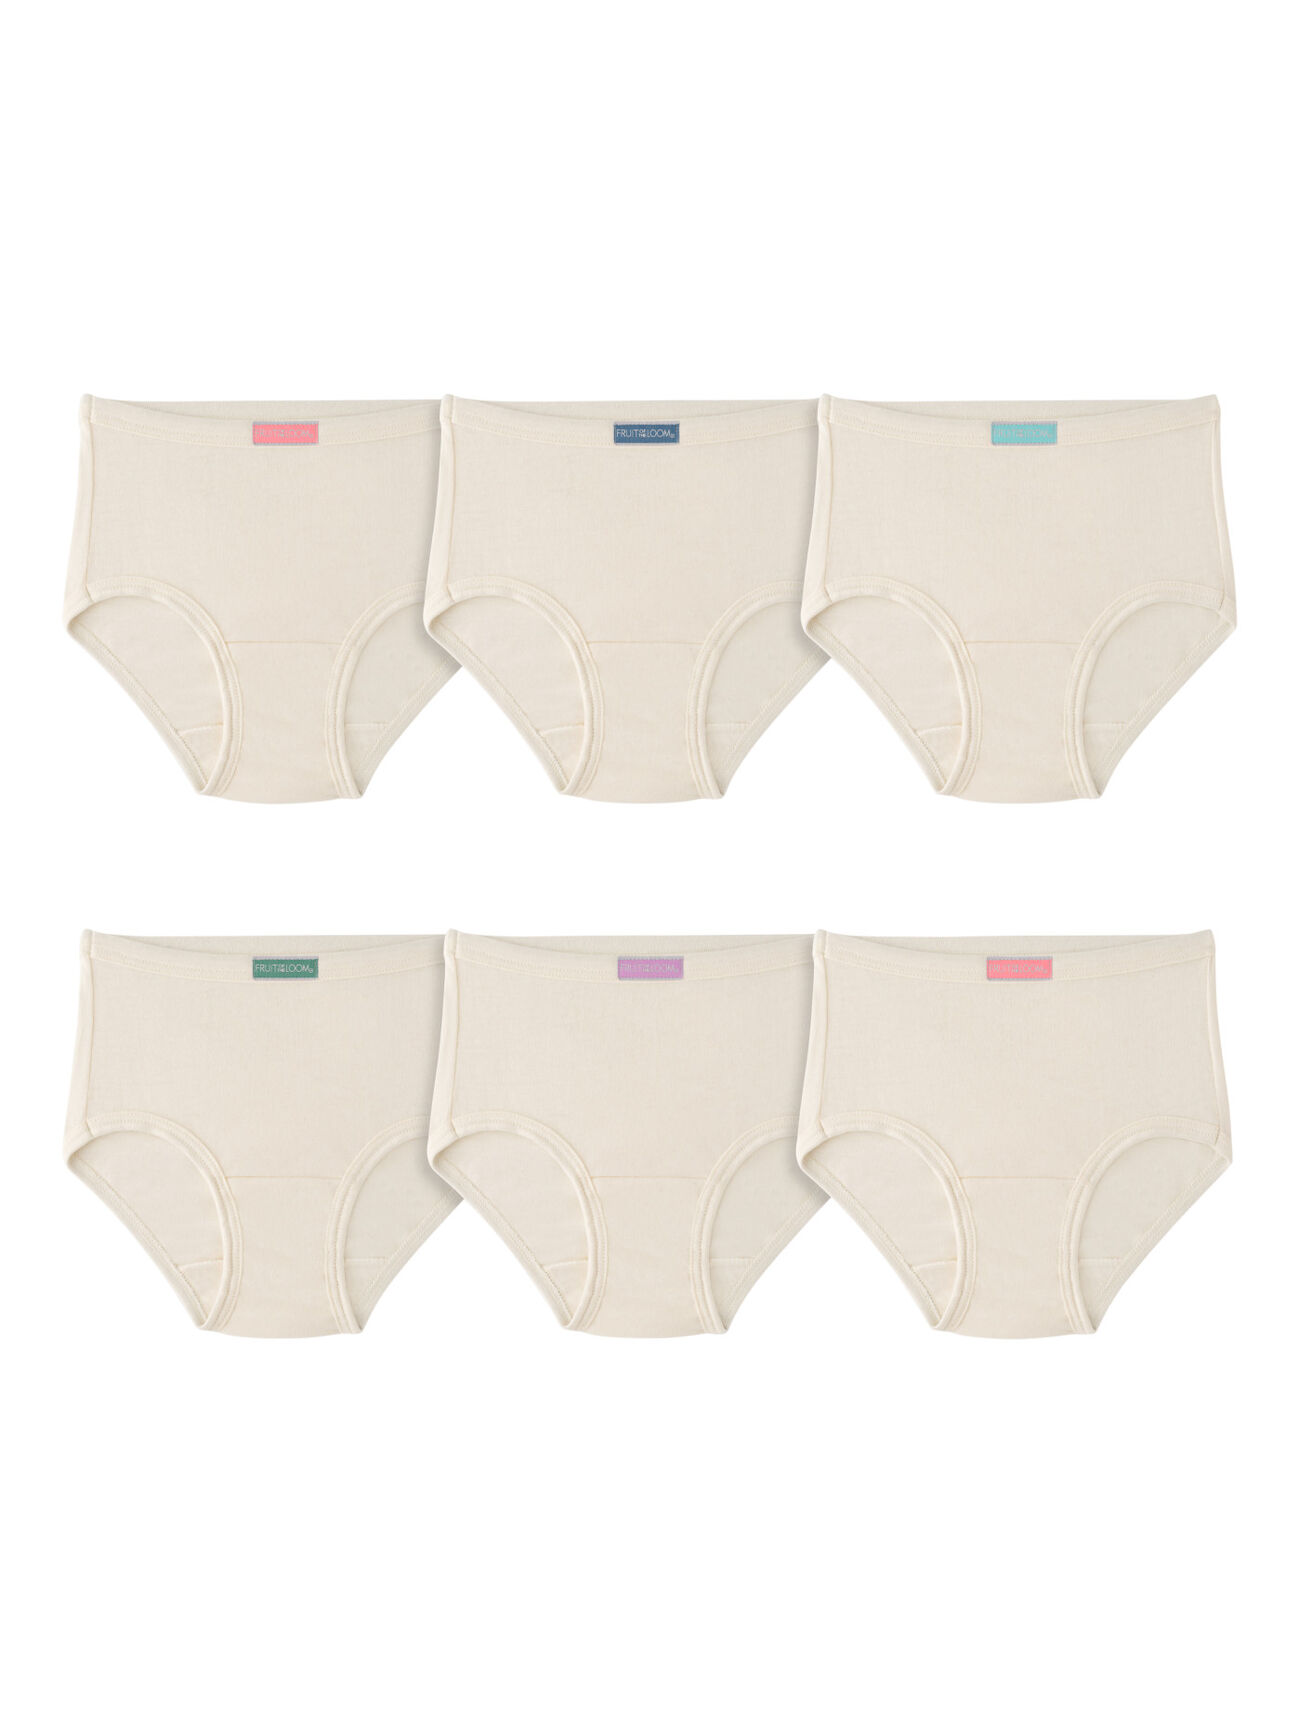  Fruit of the Loom Girls 6 Pack Assorted Cotton Briefs